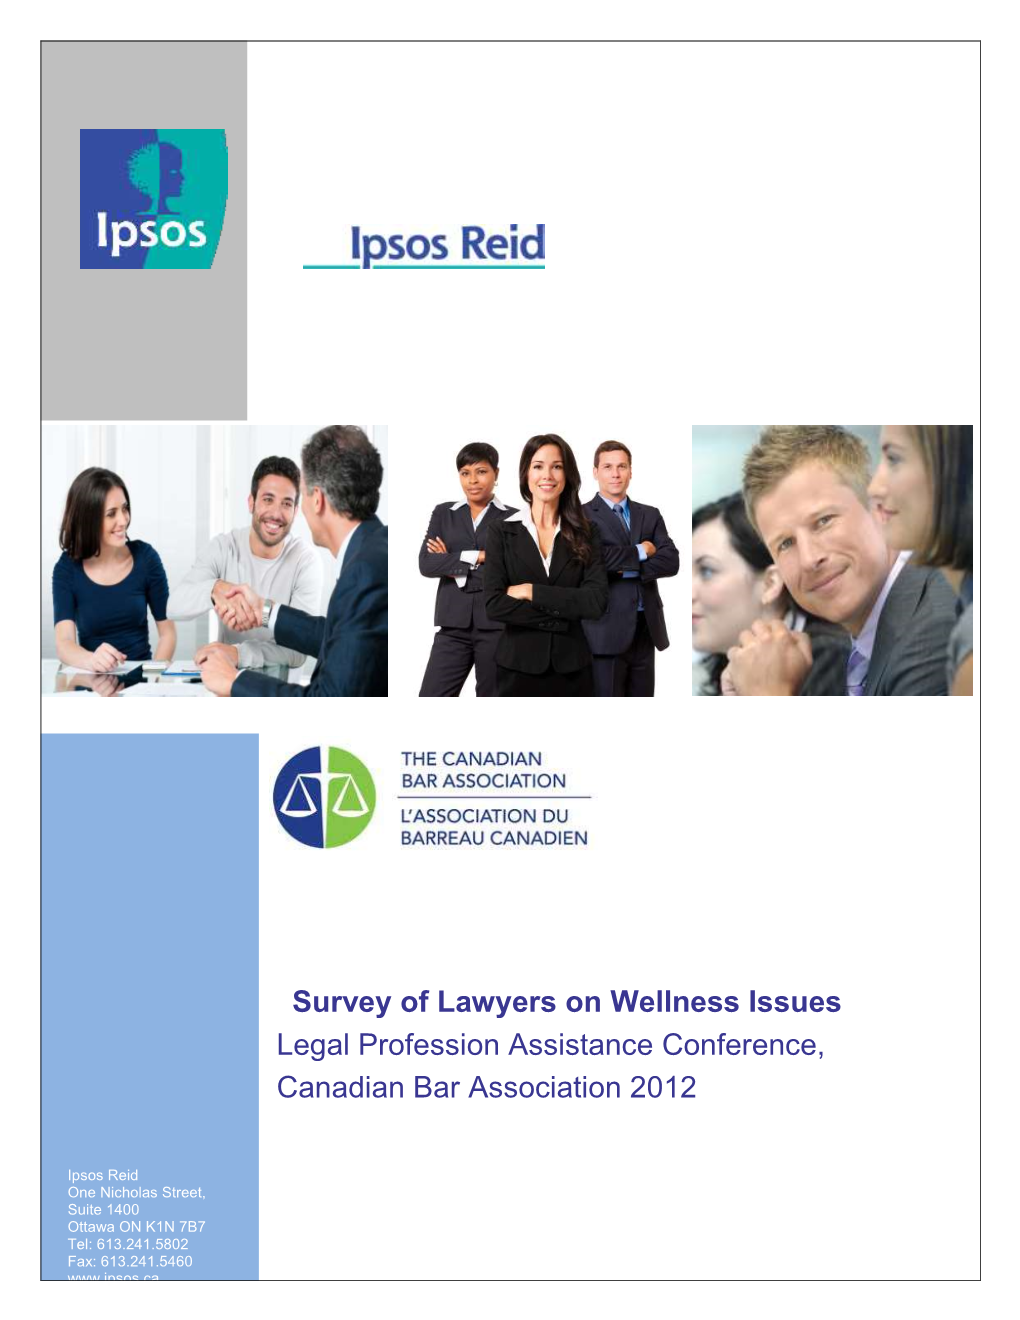 Survey of Lawyers on Wellness Issues Legal Profession Assistance Conference, Canadian Bar Association 2012